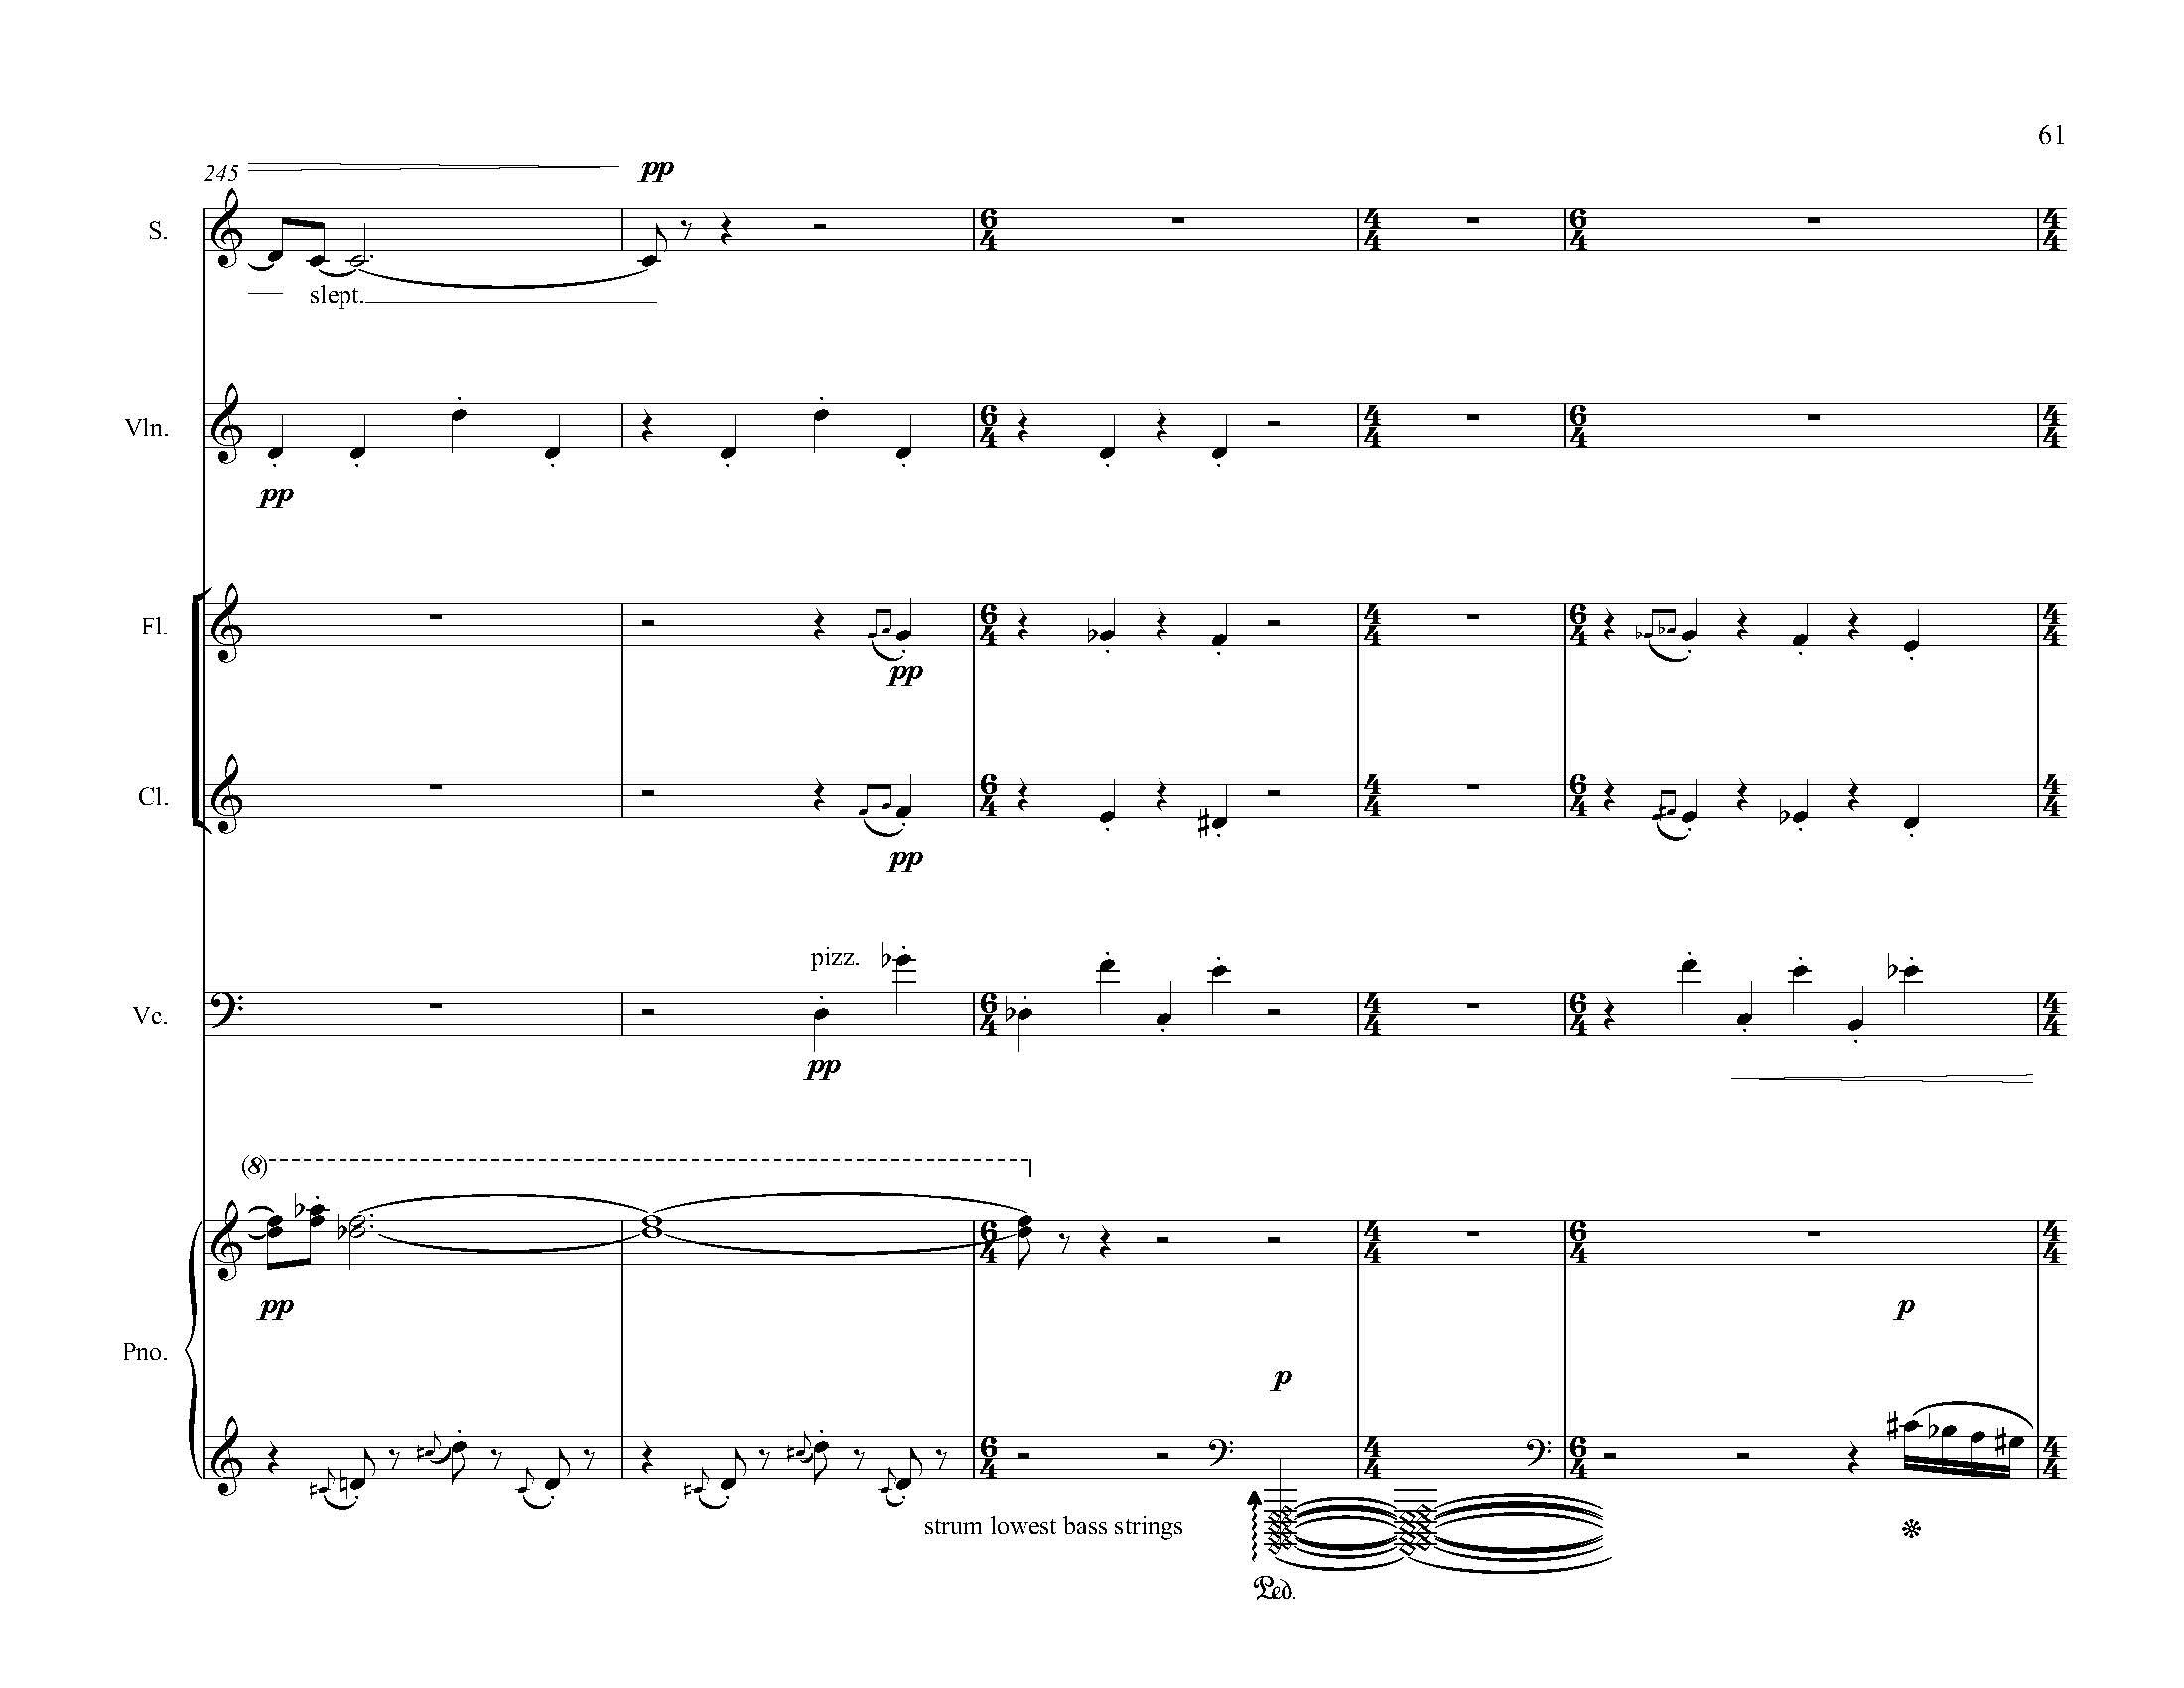 The Hill Wife - Complete Score_Page_069.jpg